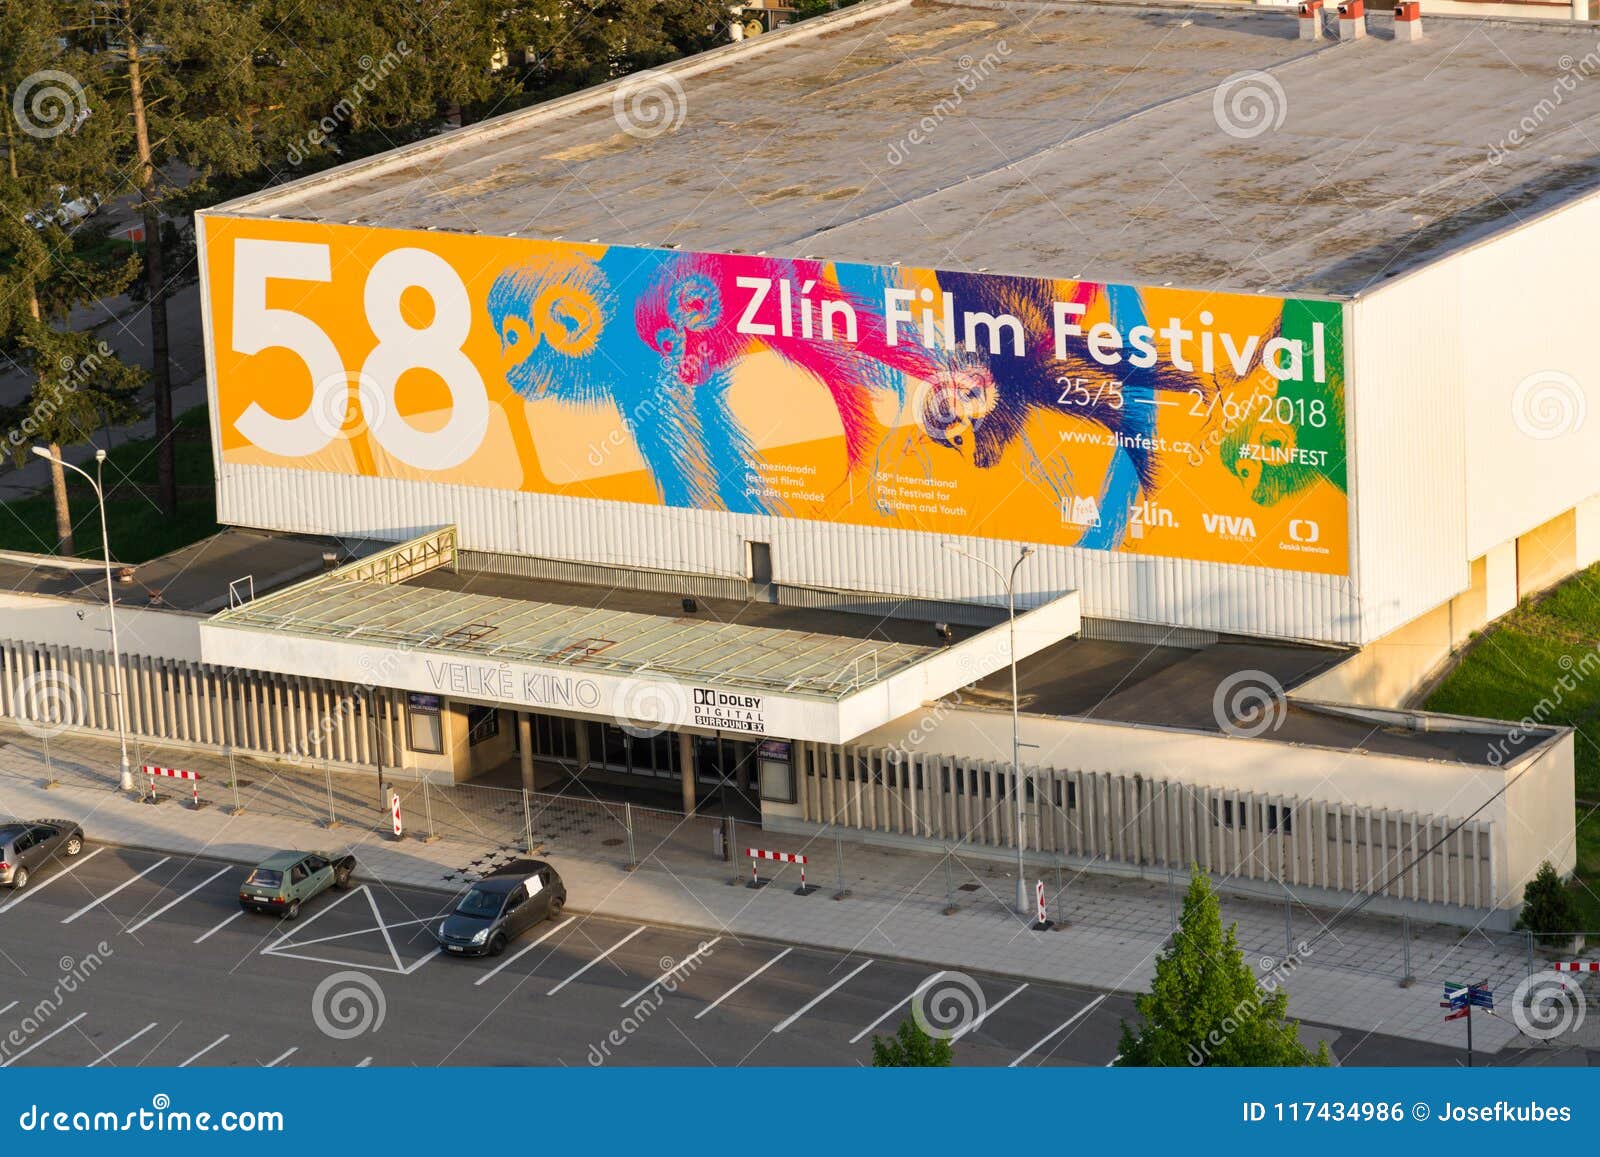 Zlin International Film Festival For Children And Youth Poster On Big Cinema Editorial Photo Image Of Movie Bata 117434986